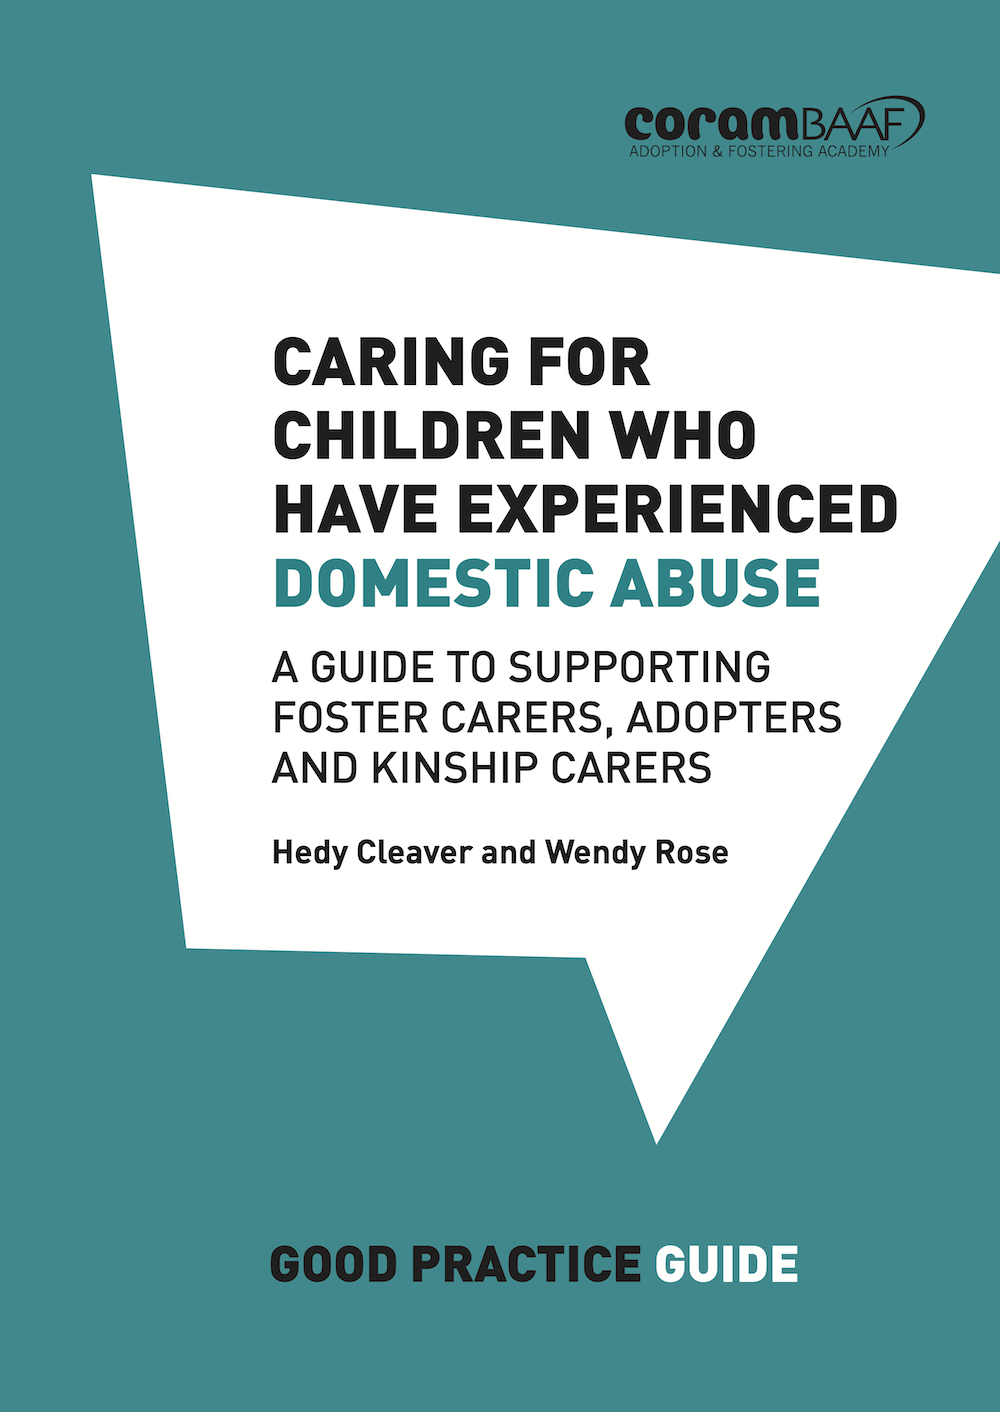 Caring for children who have experienced domestic abuse